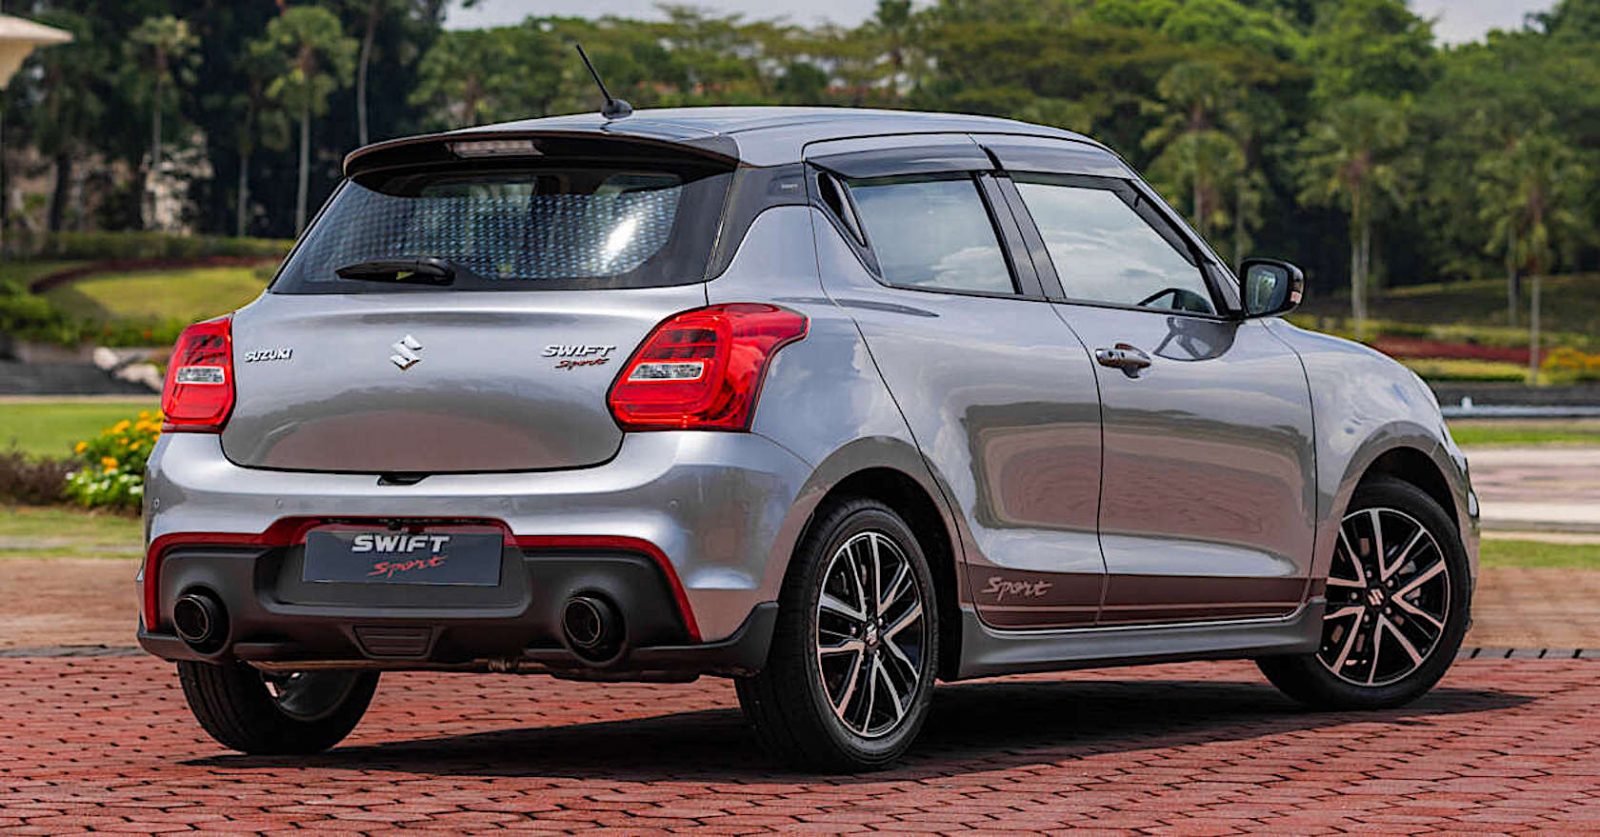 New Limited Edition Suzuki Swift Sport Launched In Malaysia - Carlist